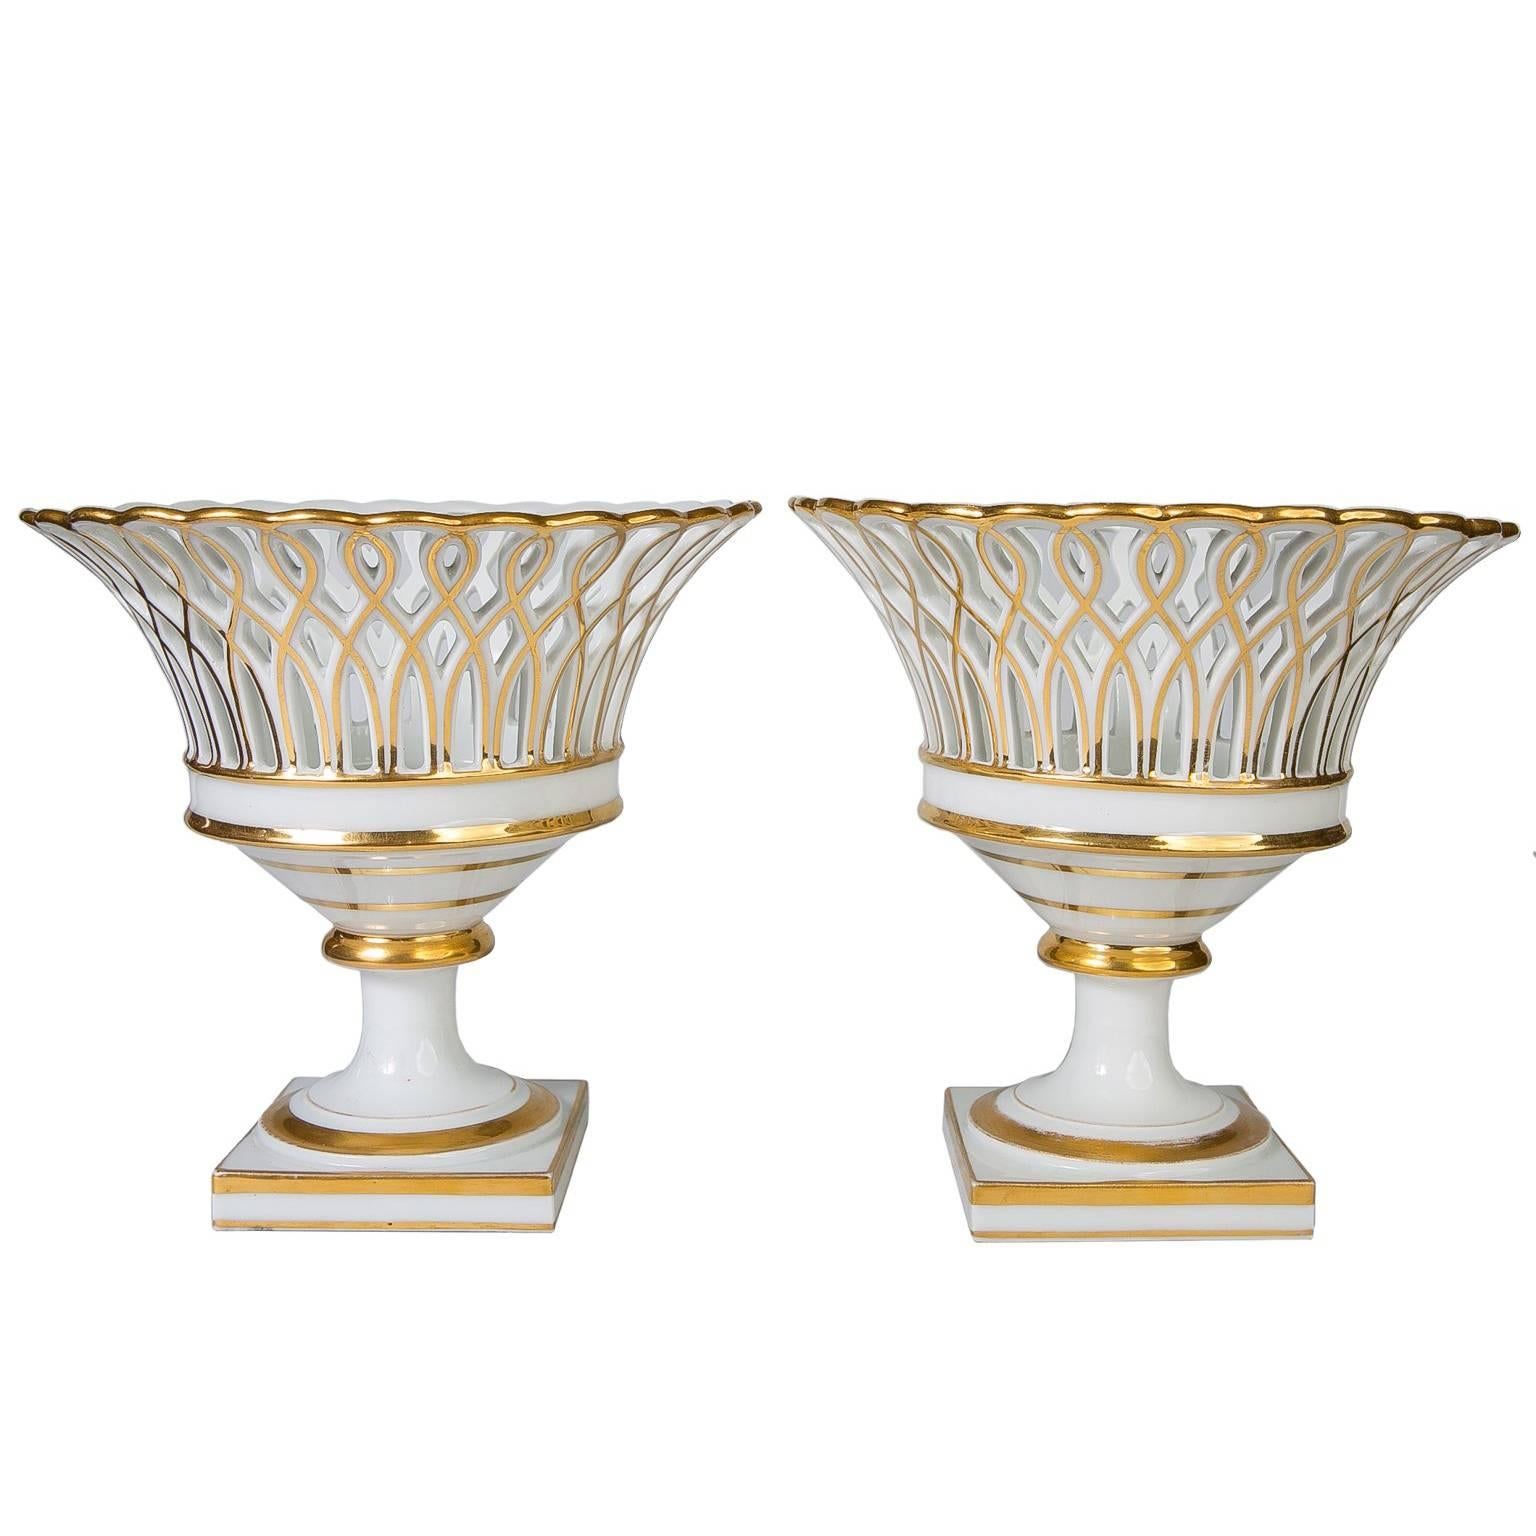 Pair of Antique French Porcelain Gilded Baskets 'Corbeilles'